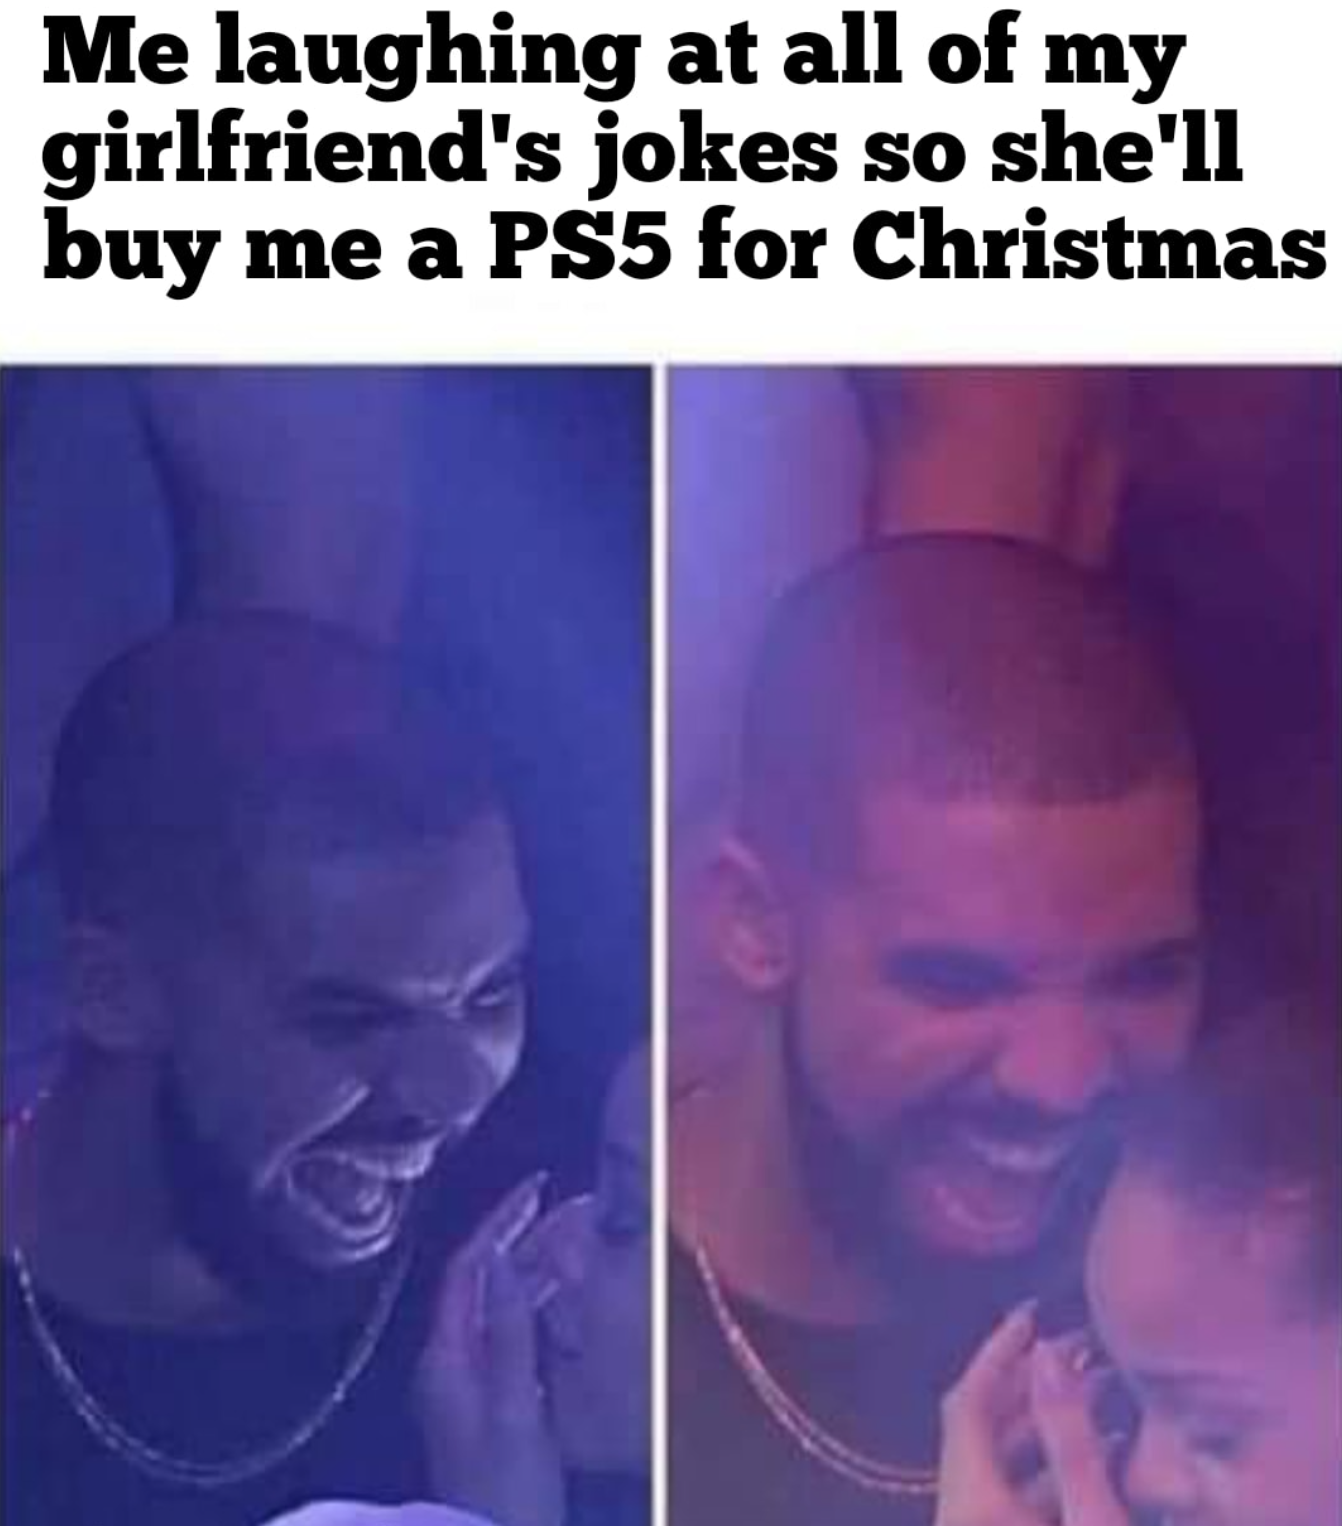 funny gaming memes - burning spear marcus garvey garvey's - Me laughing at all of my girlfriend's jokes so she'll buy me a PS5 for Christmas